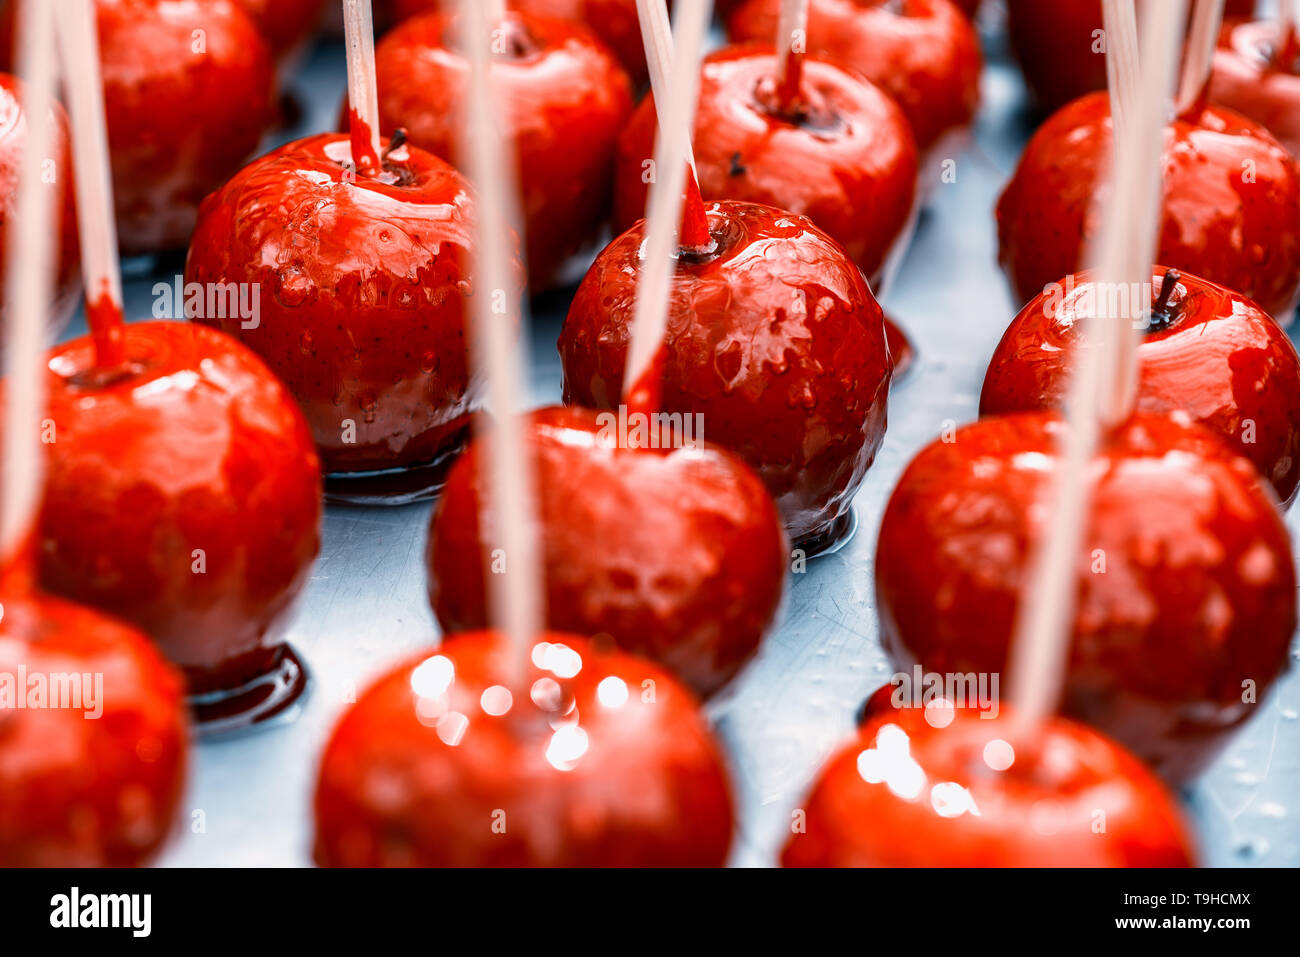 Caramelised red apples Stock Photo